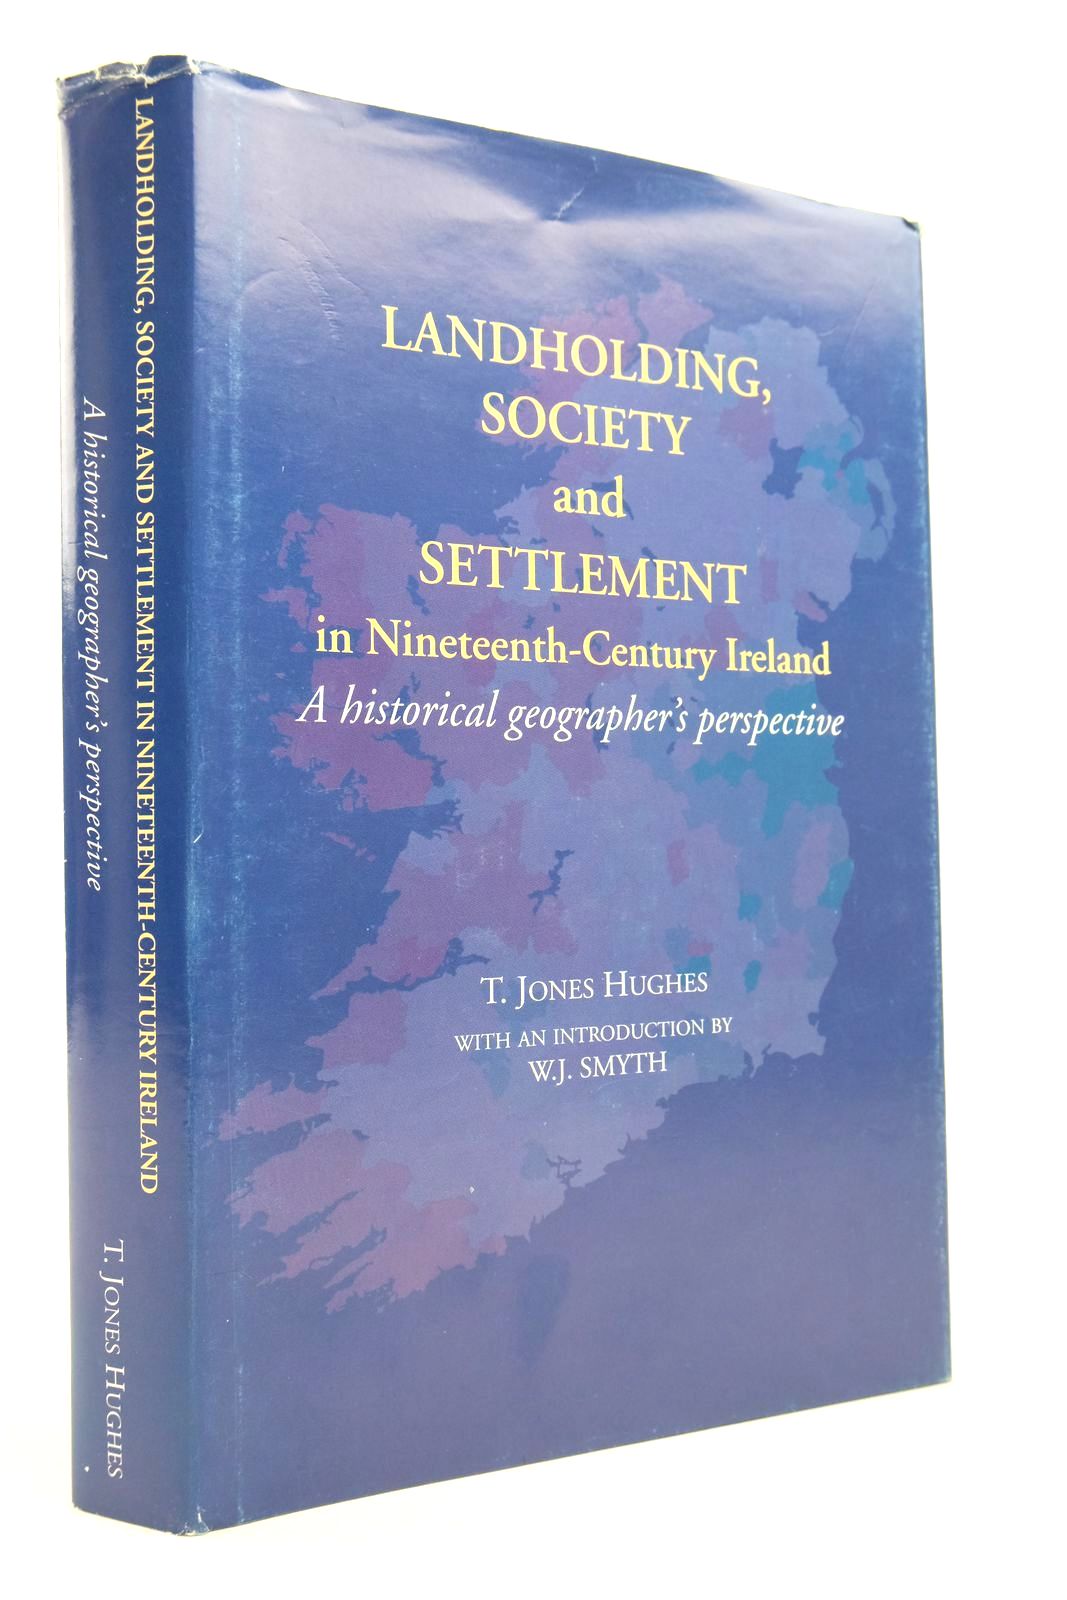 Photo of LANDHOLDING, SOCIETY AND SETTLEMENT IN NINETEENTH-CENTURY IRELAND: A HISTORICAL GEOGRAPHER'S PERSPECTIVE- Stock Number: 2140675